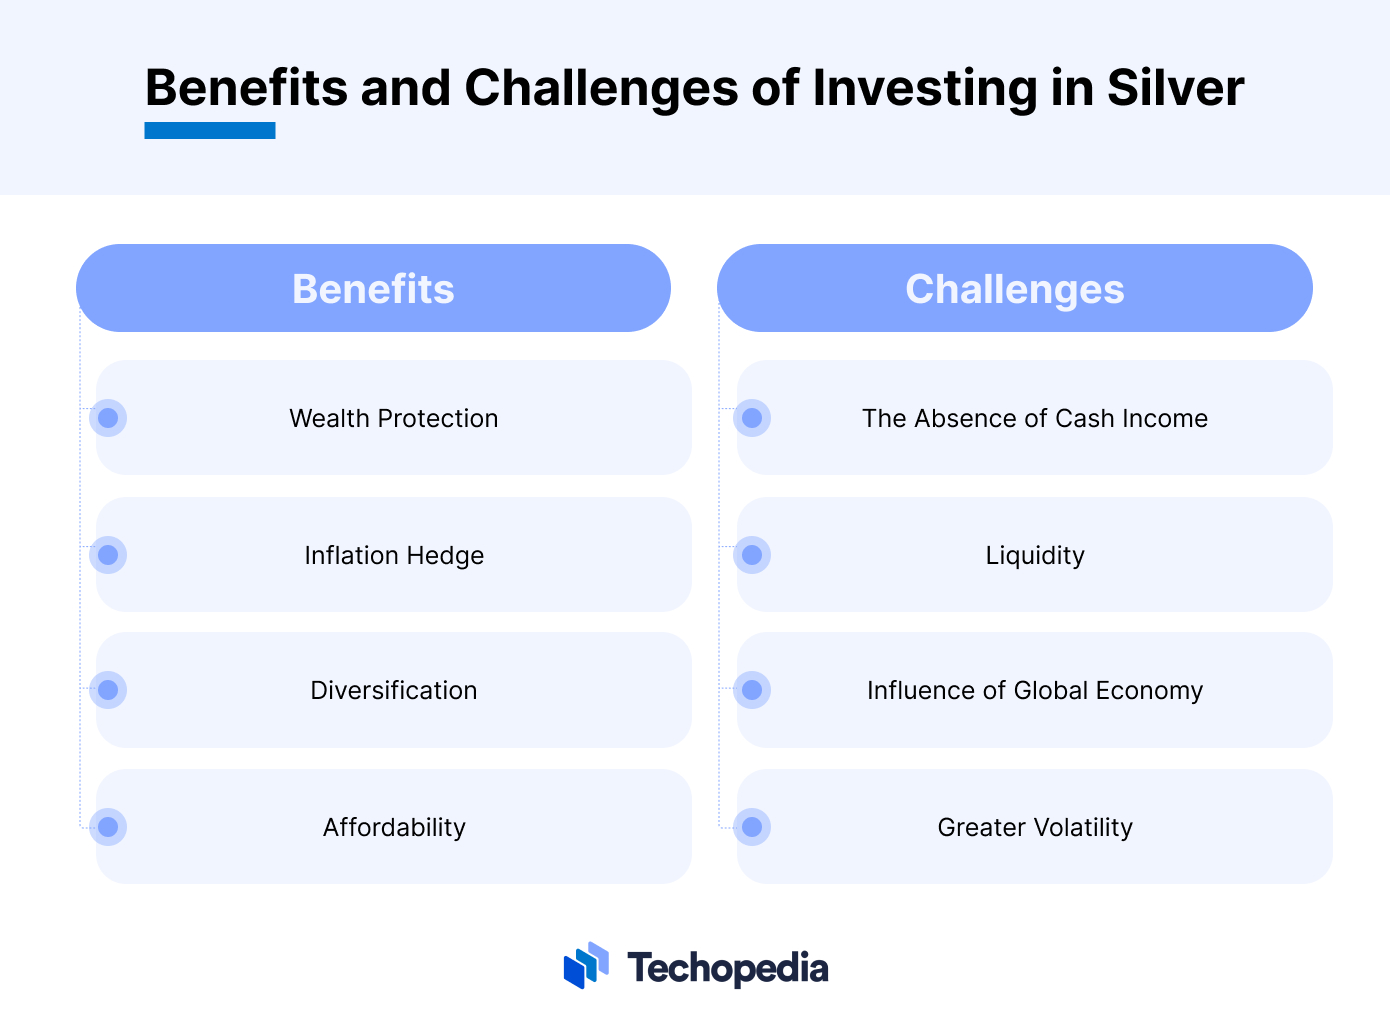 Benefits and Challenges of Investing in Silver